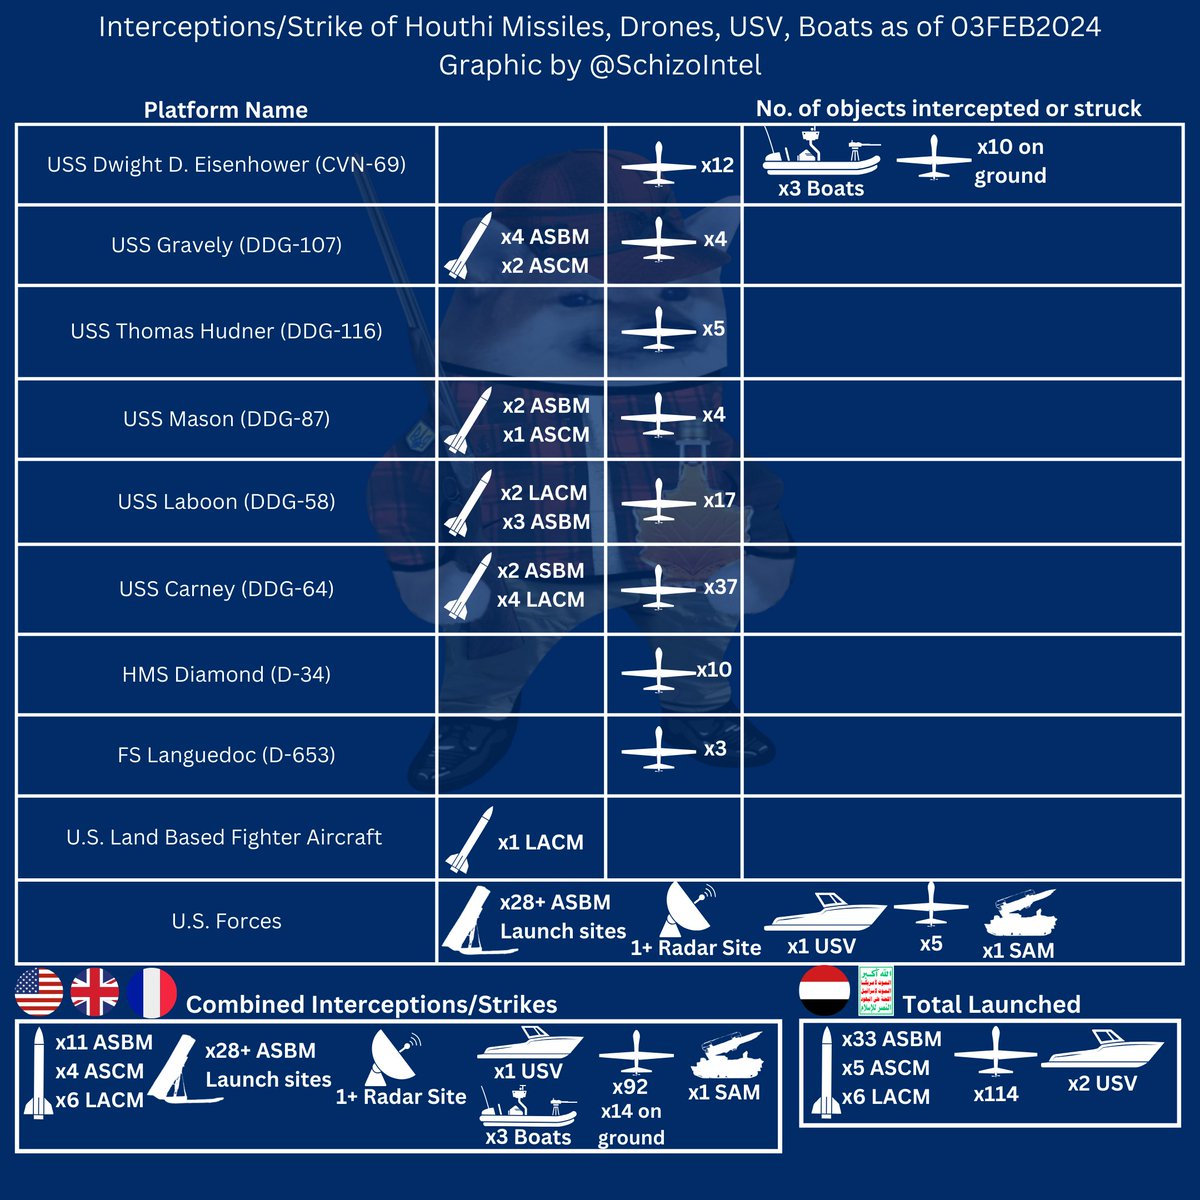 03FEB2024 Updated Infographic of Houthi Missiles, Drones, USV's, Manned boat launches, interceptions.

Updates Per USCENTCOM US forces intercepted the following on 02FEB2024.

USS Laboon DDG-58 and F/A-18 from USS Eisenhower CVN-69 intercepted 
7x UAV 

USS Carney DDG-64